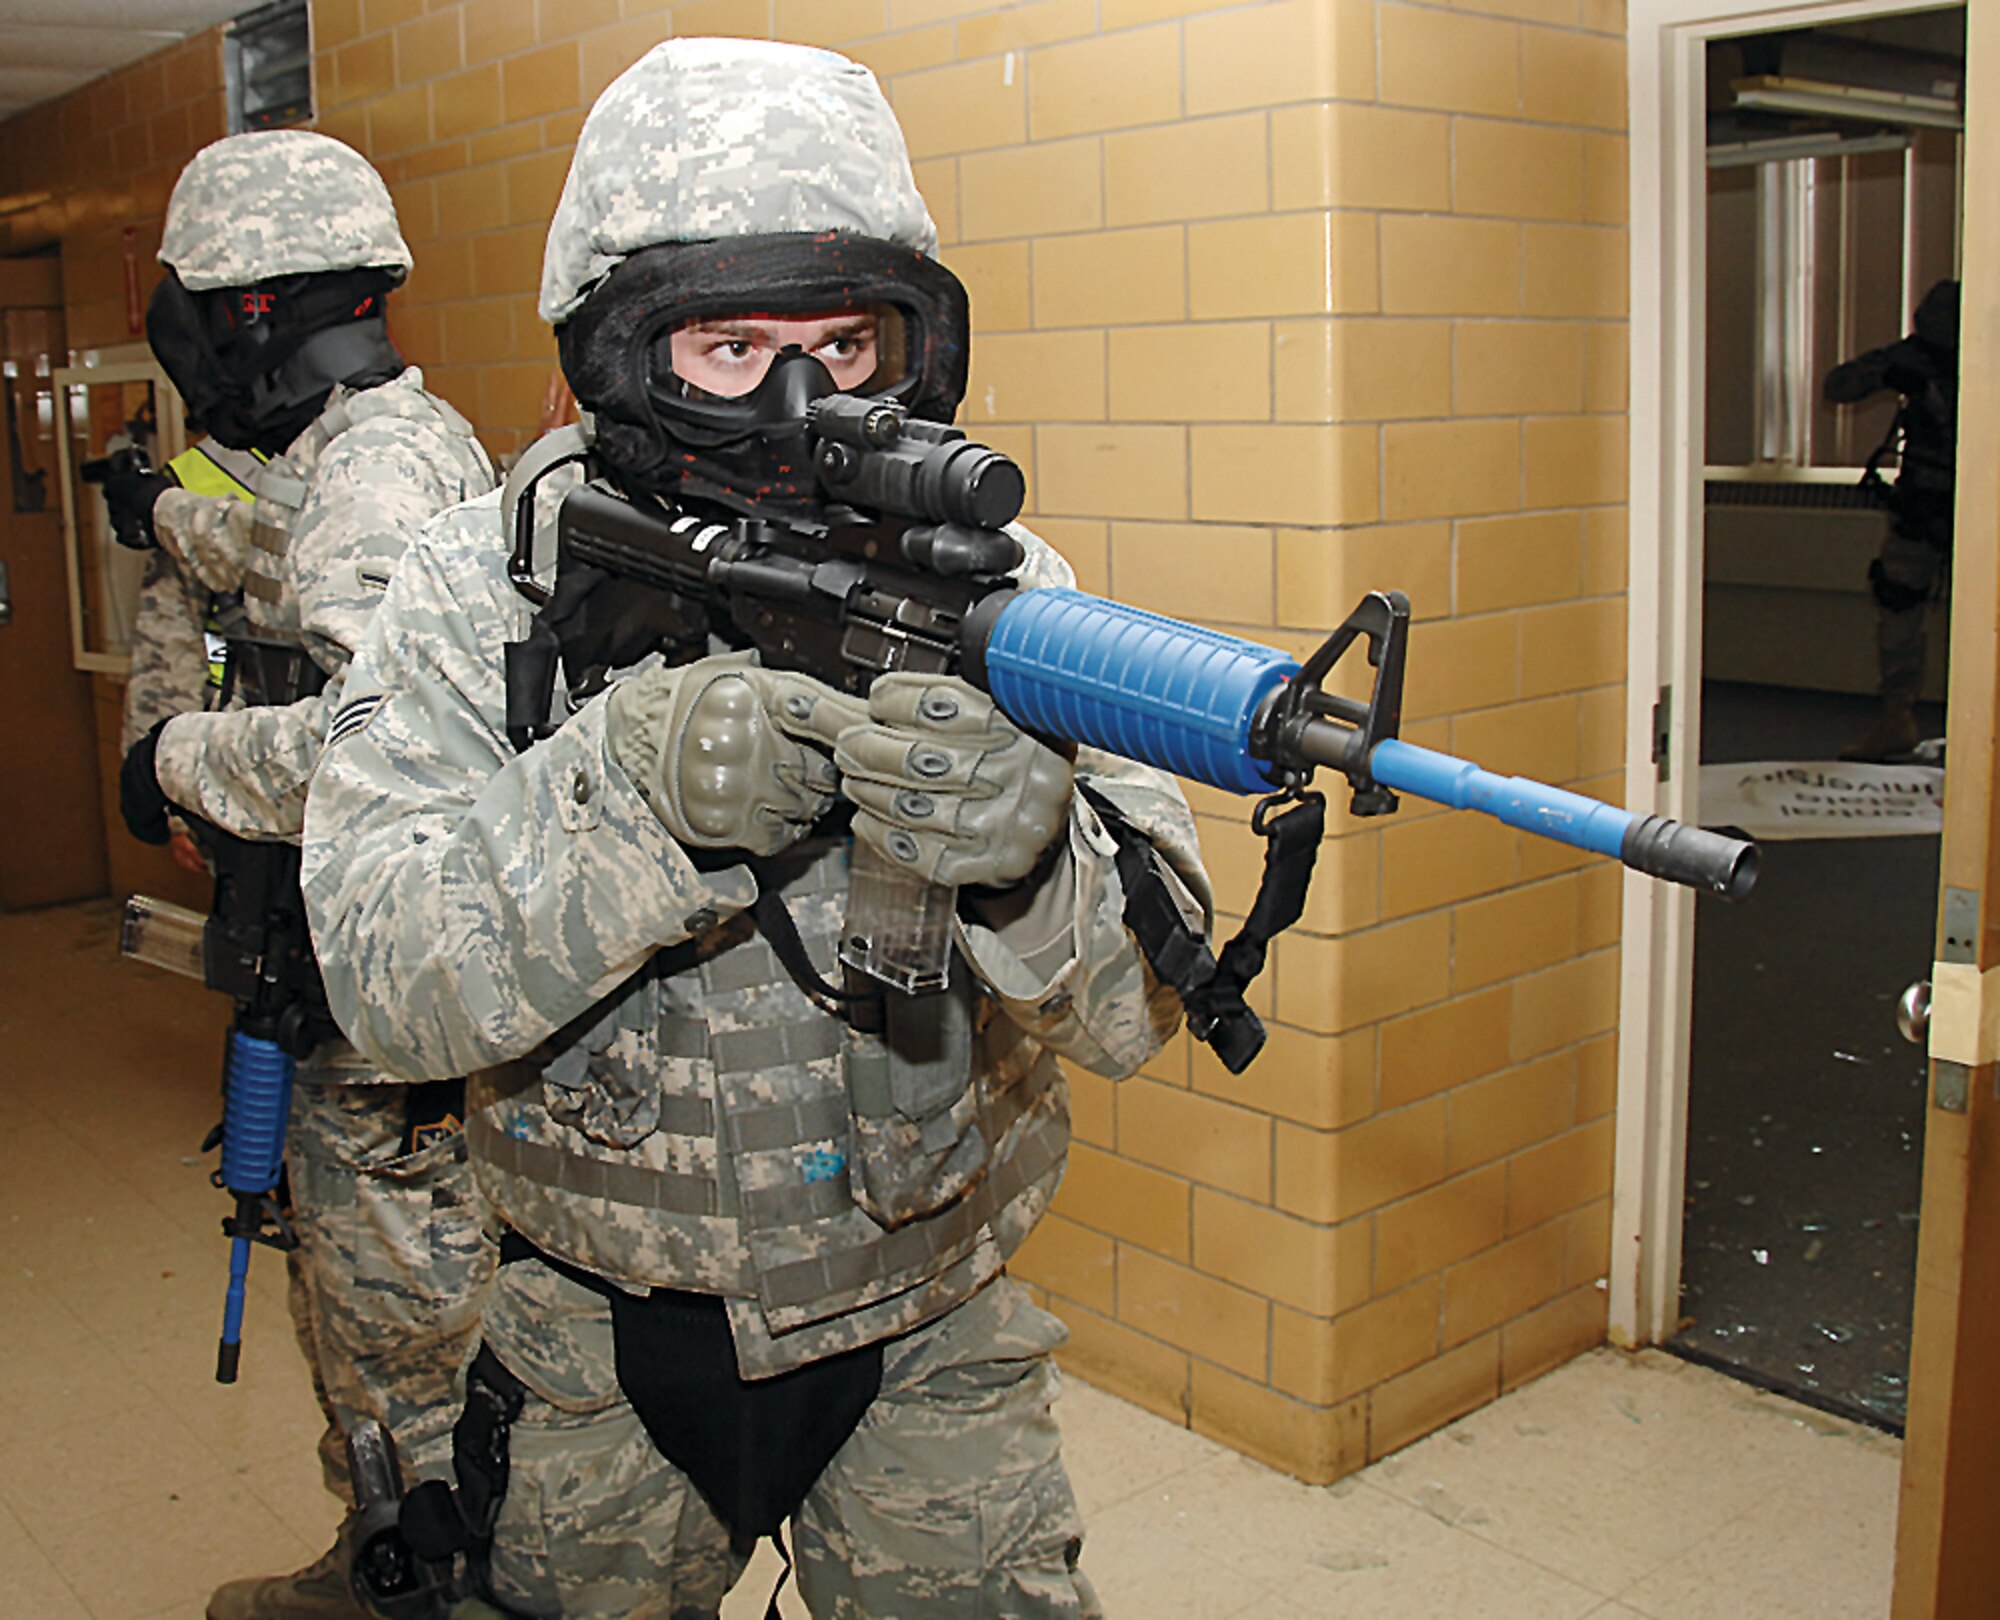 Security Forces Airmen stand guard in a hallway at Central State University while two others search a nearby room during an active shooter training exercise. (US Air Force photo by Ben Strasser)